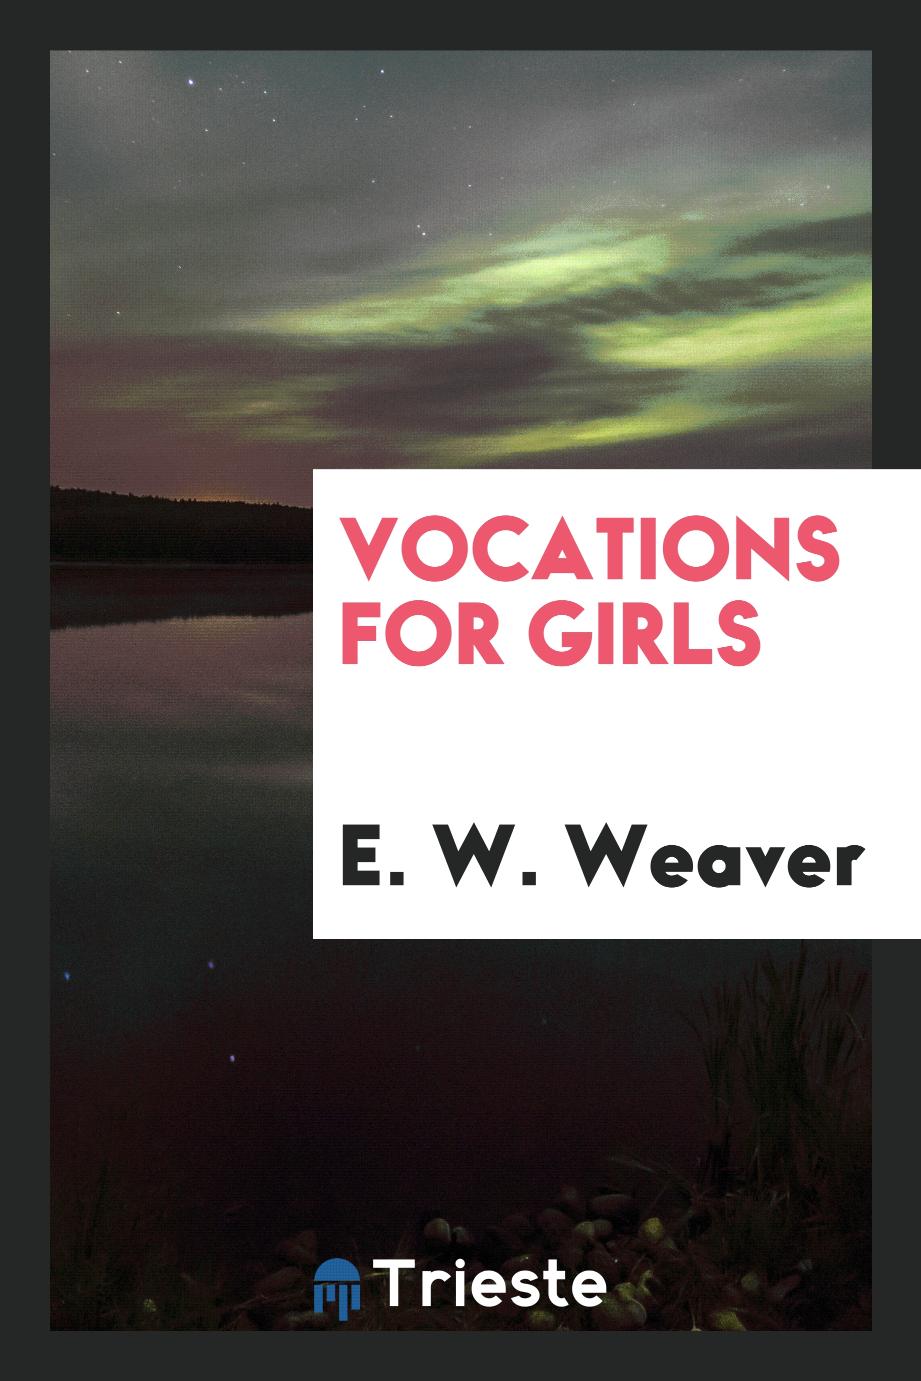 Vocations for girls